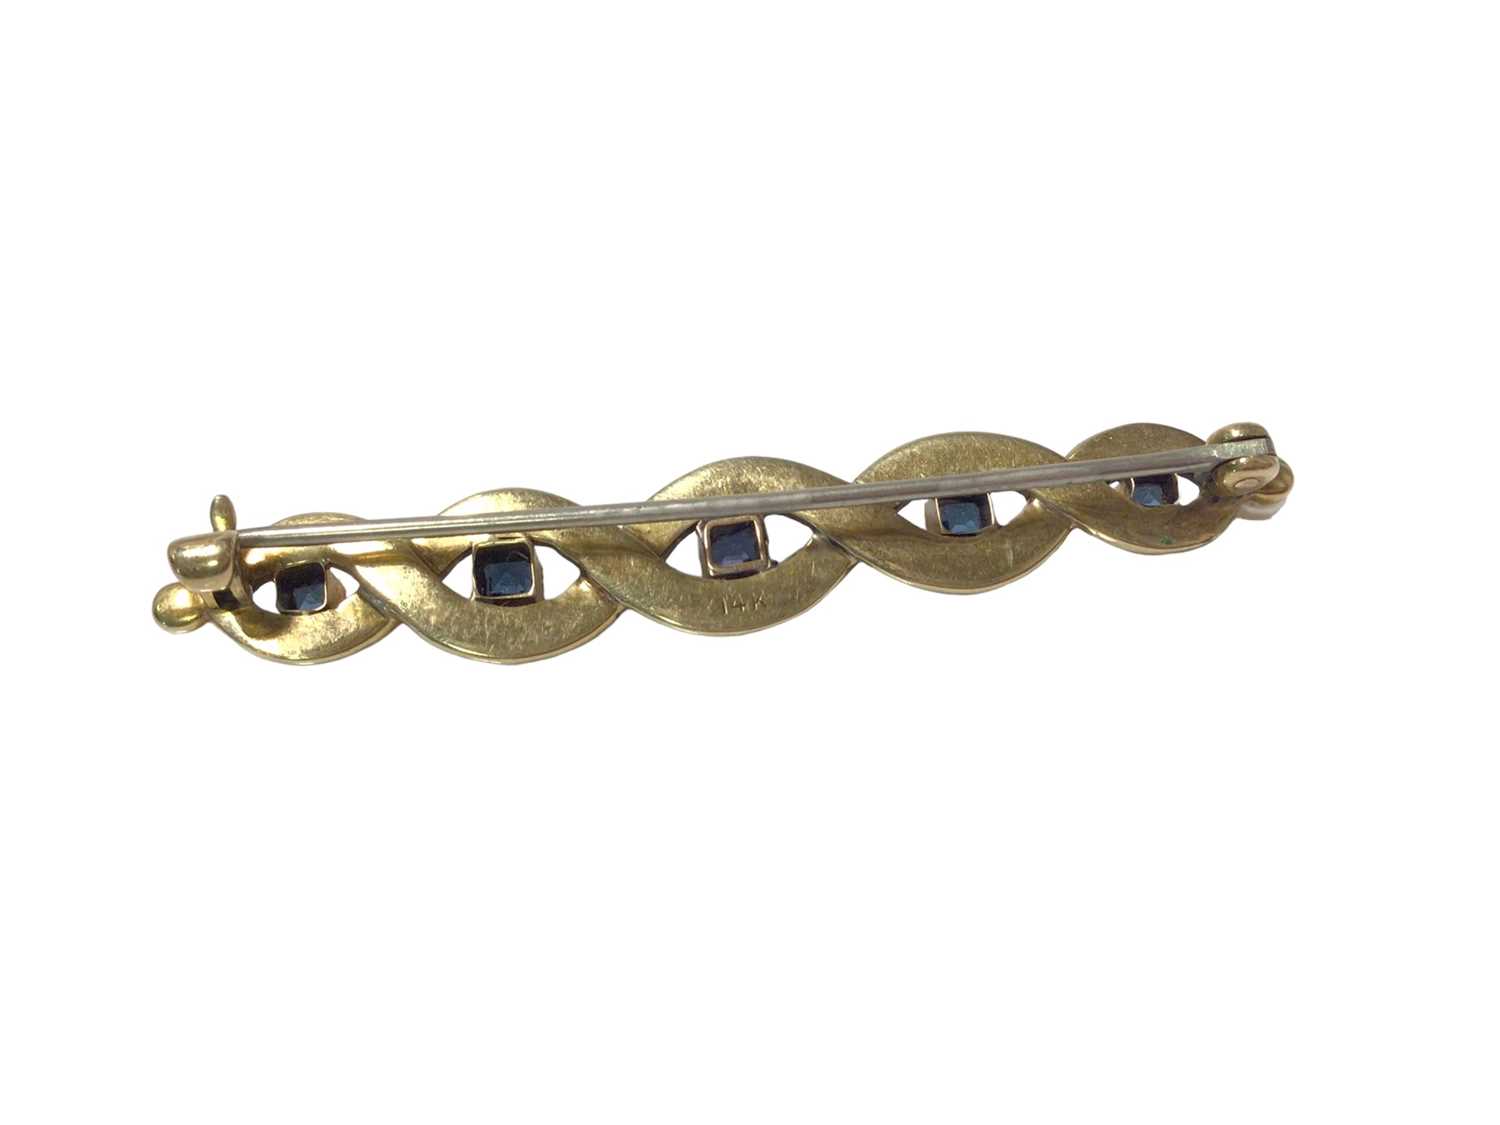 Edwardian 14K gold sapphire and seed pearl bar brooch and similar amethyst and seed pearl pendant on - Image 3 of 5